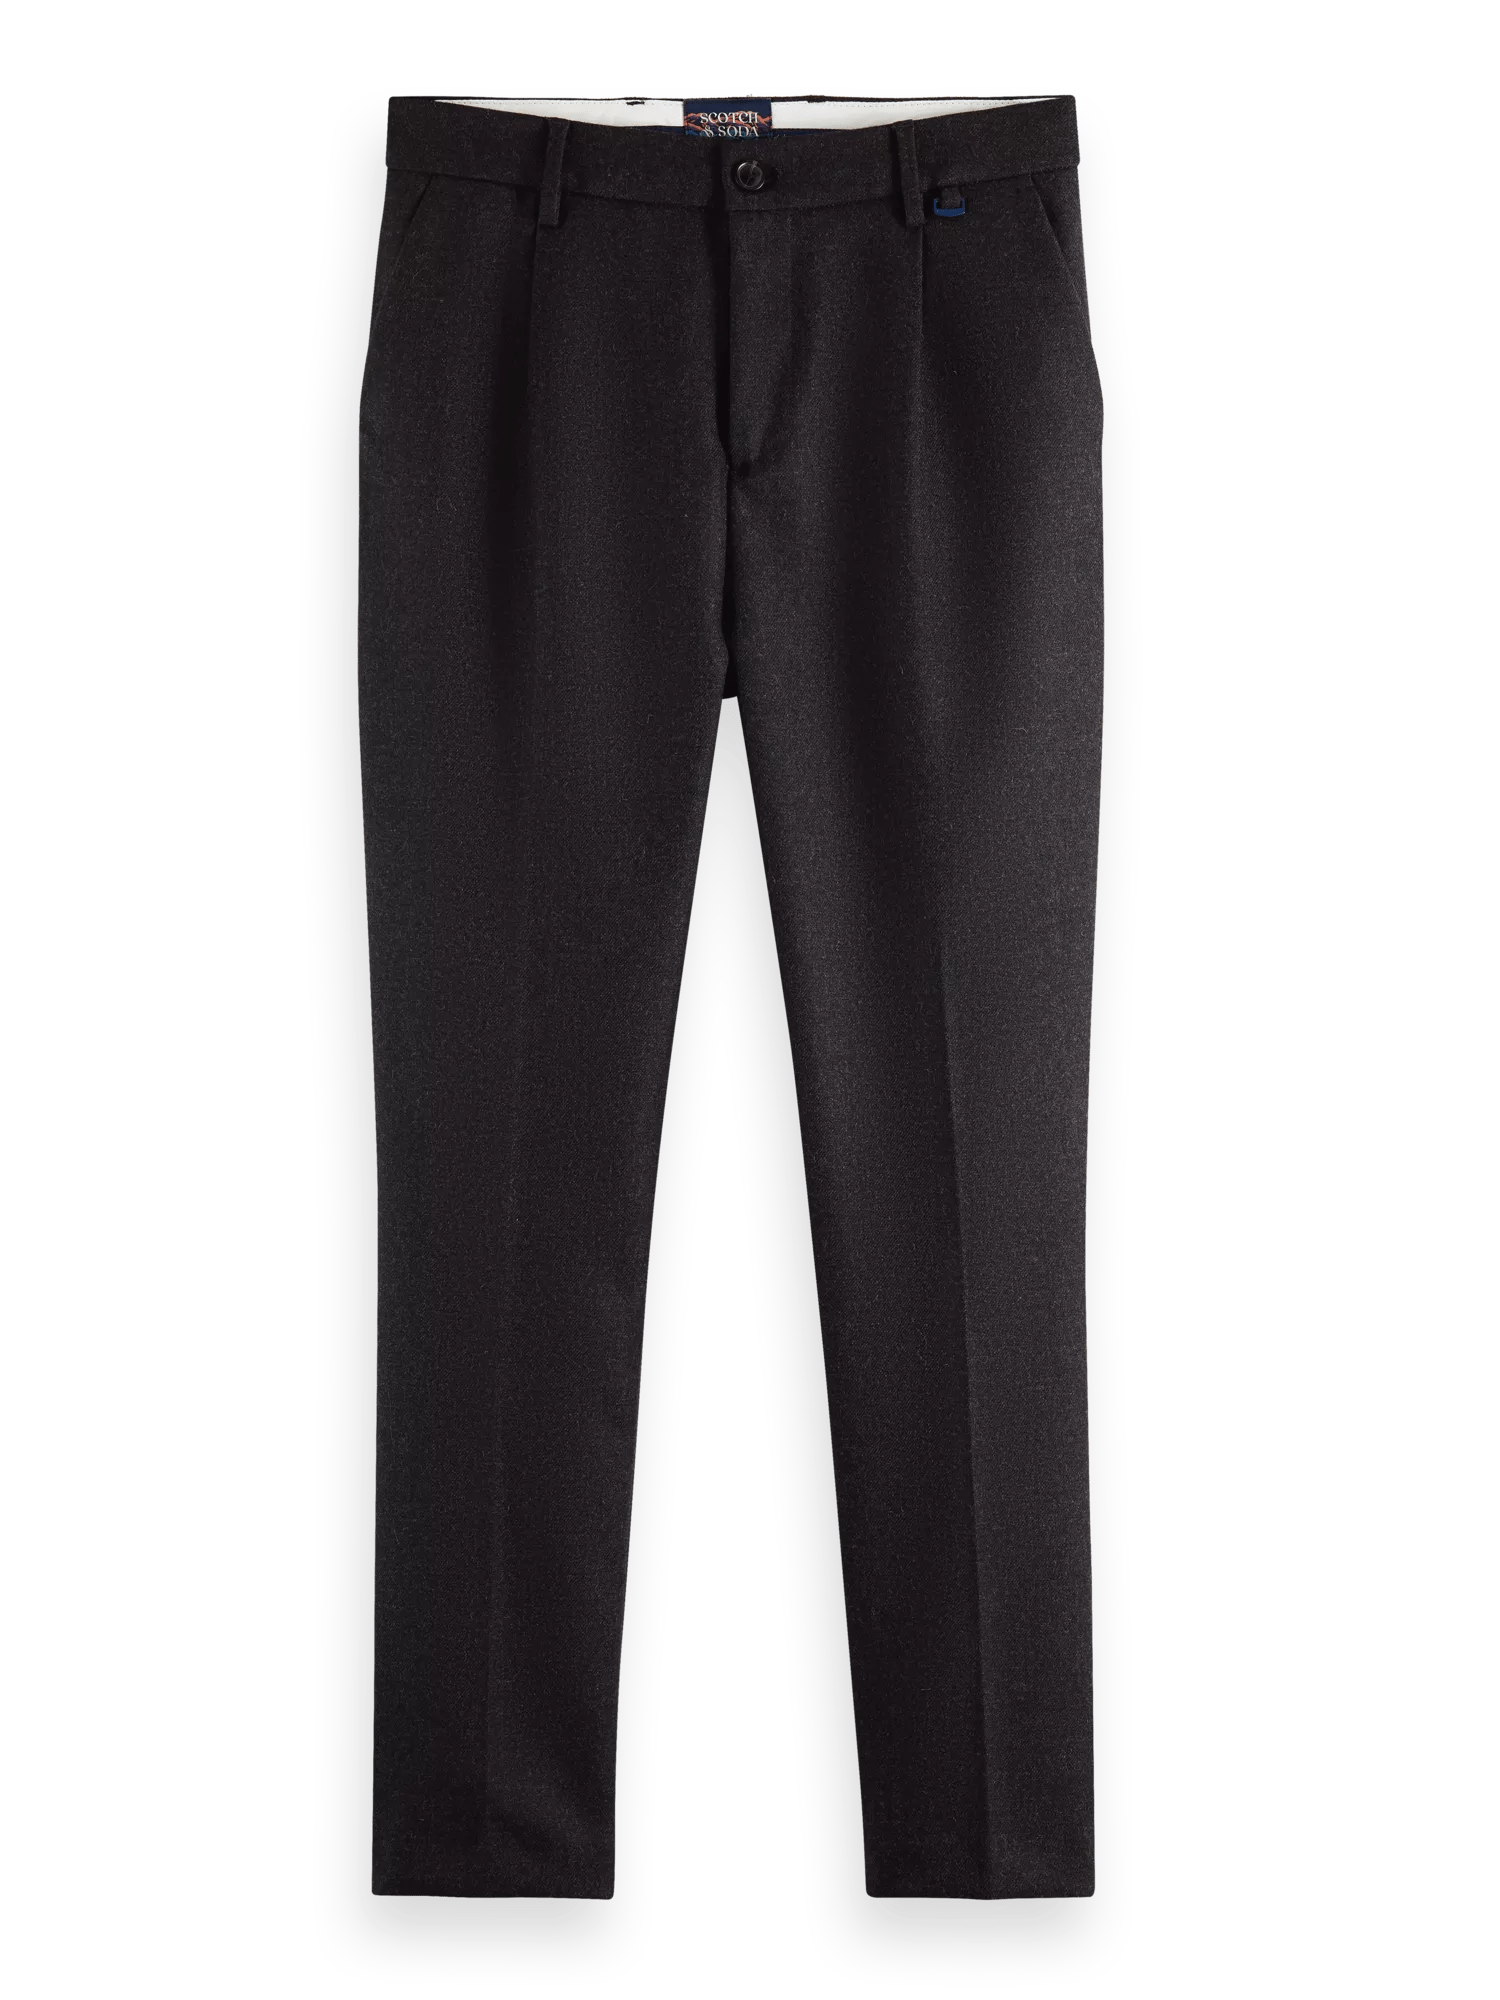 Scotch & Soda Pleated wool-blended dress trousers FNT